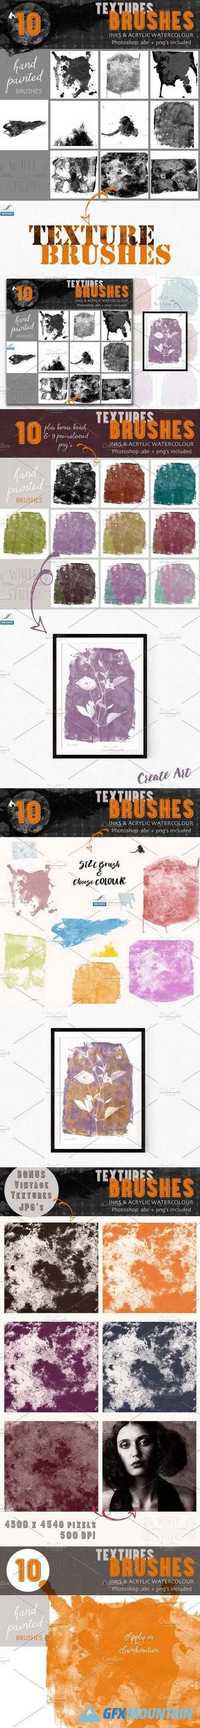 TEXTURES BRUSHES- INKS & ACRYLICS 1596098